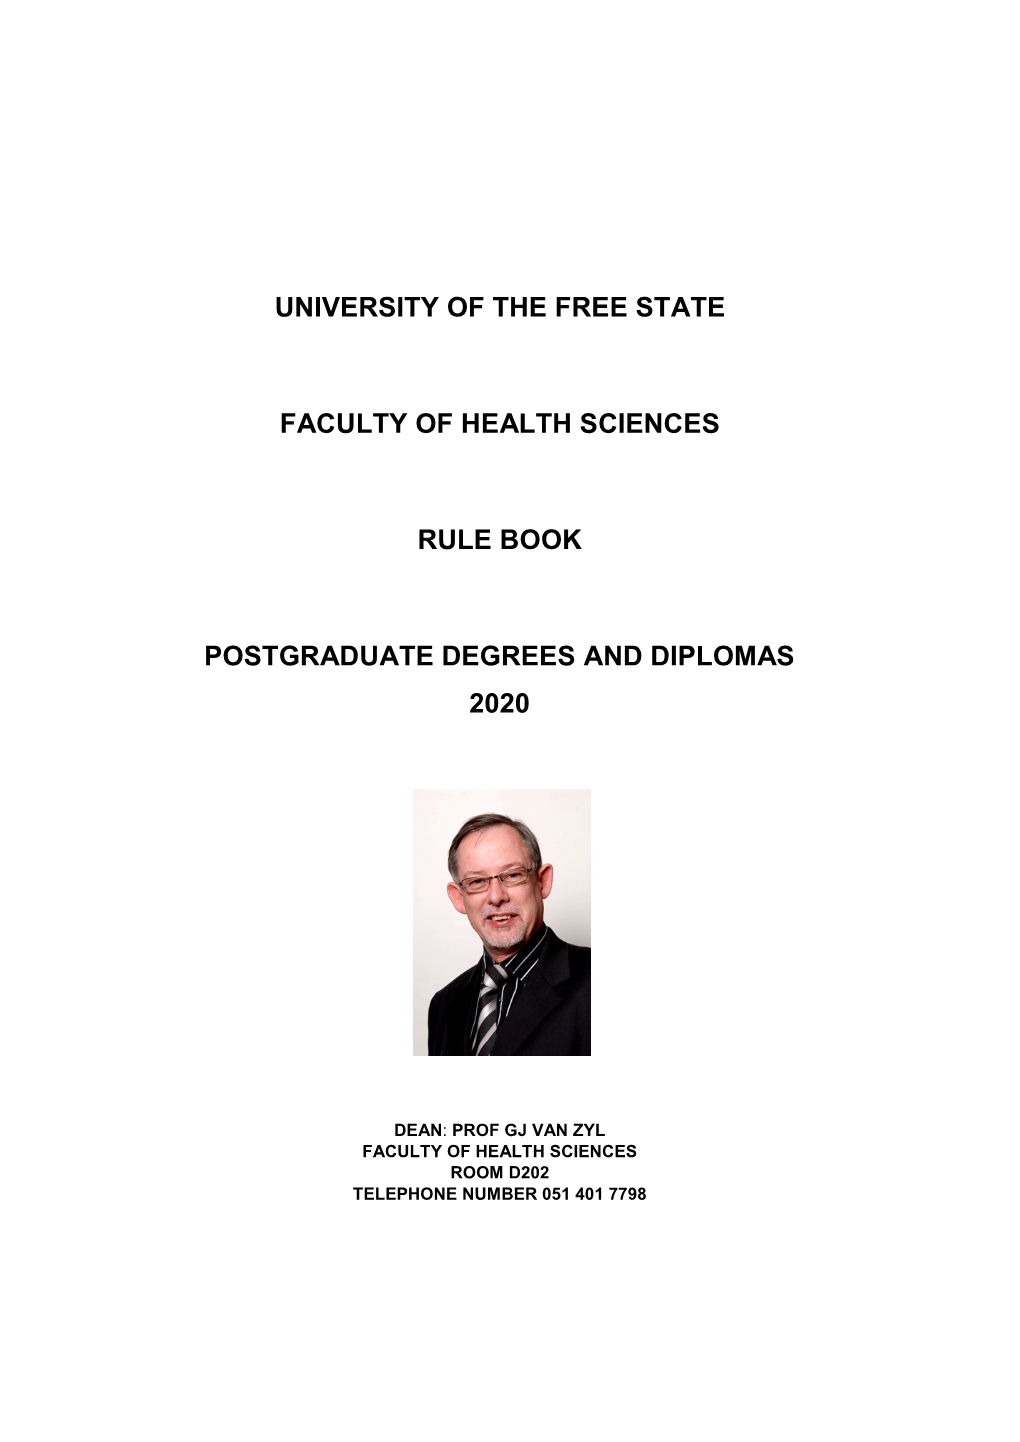 University of the Free State Faculty of Health Sciences Rule Book